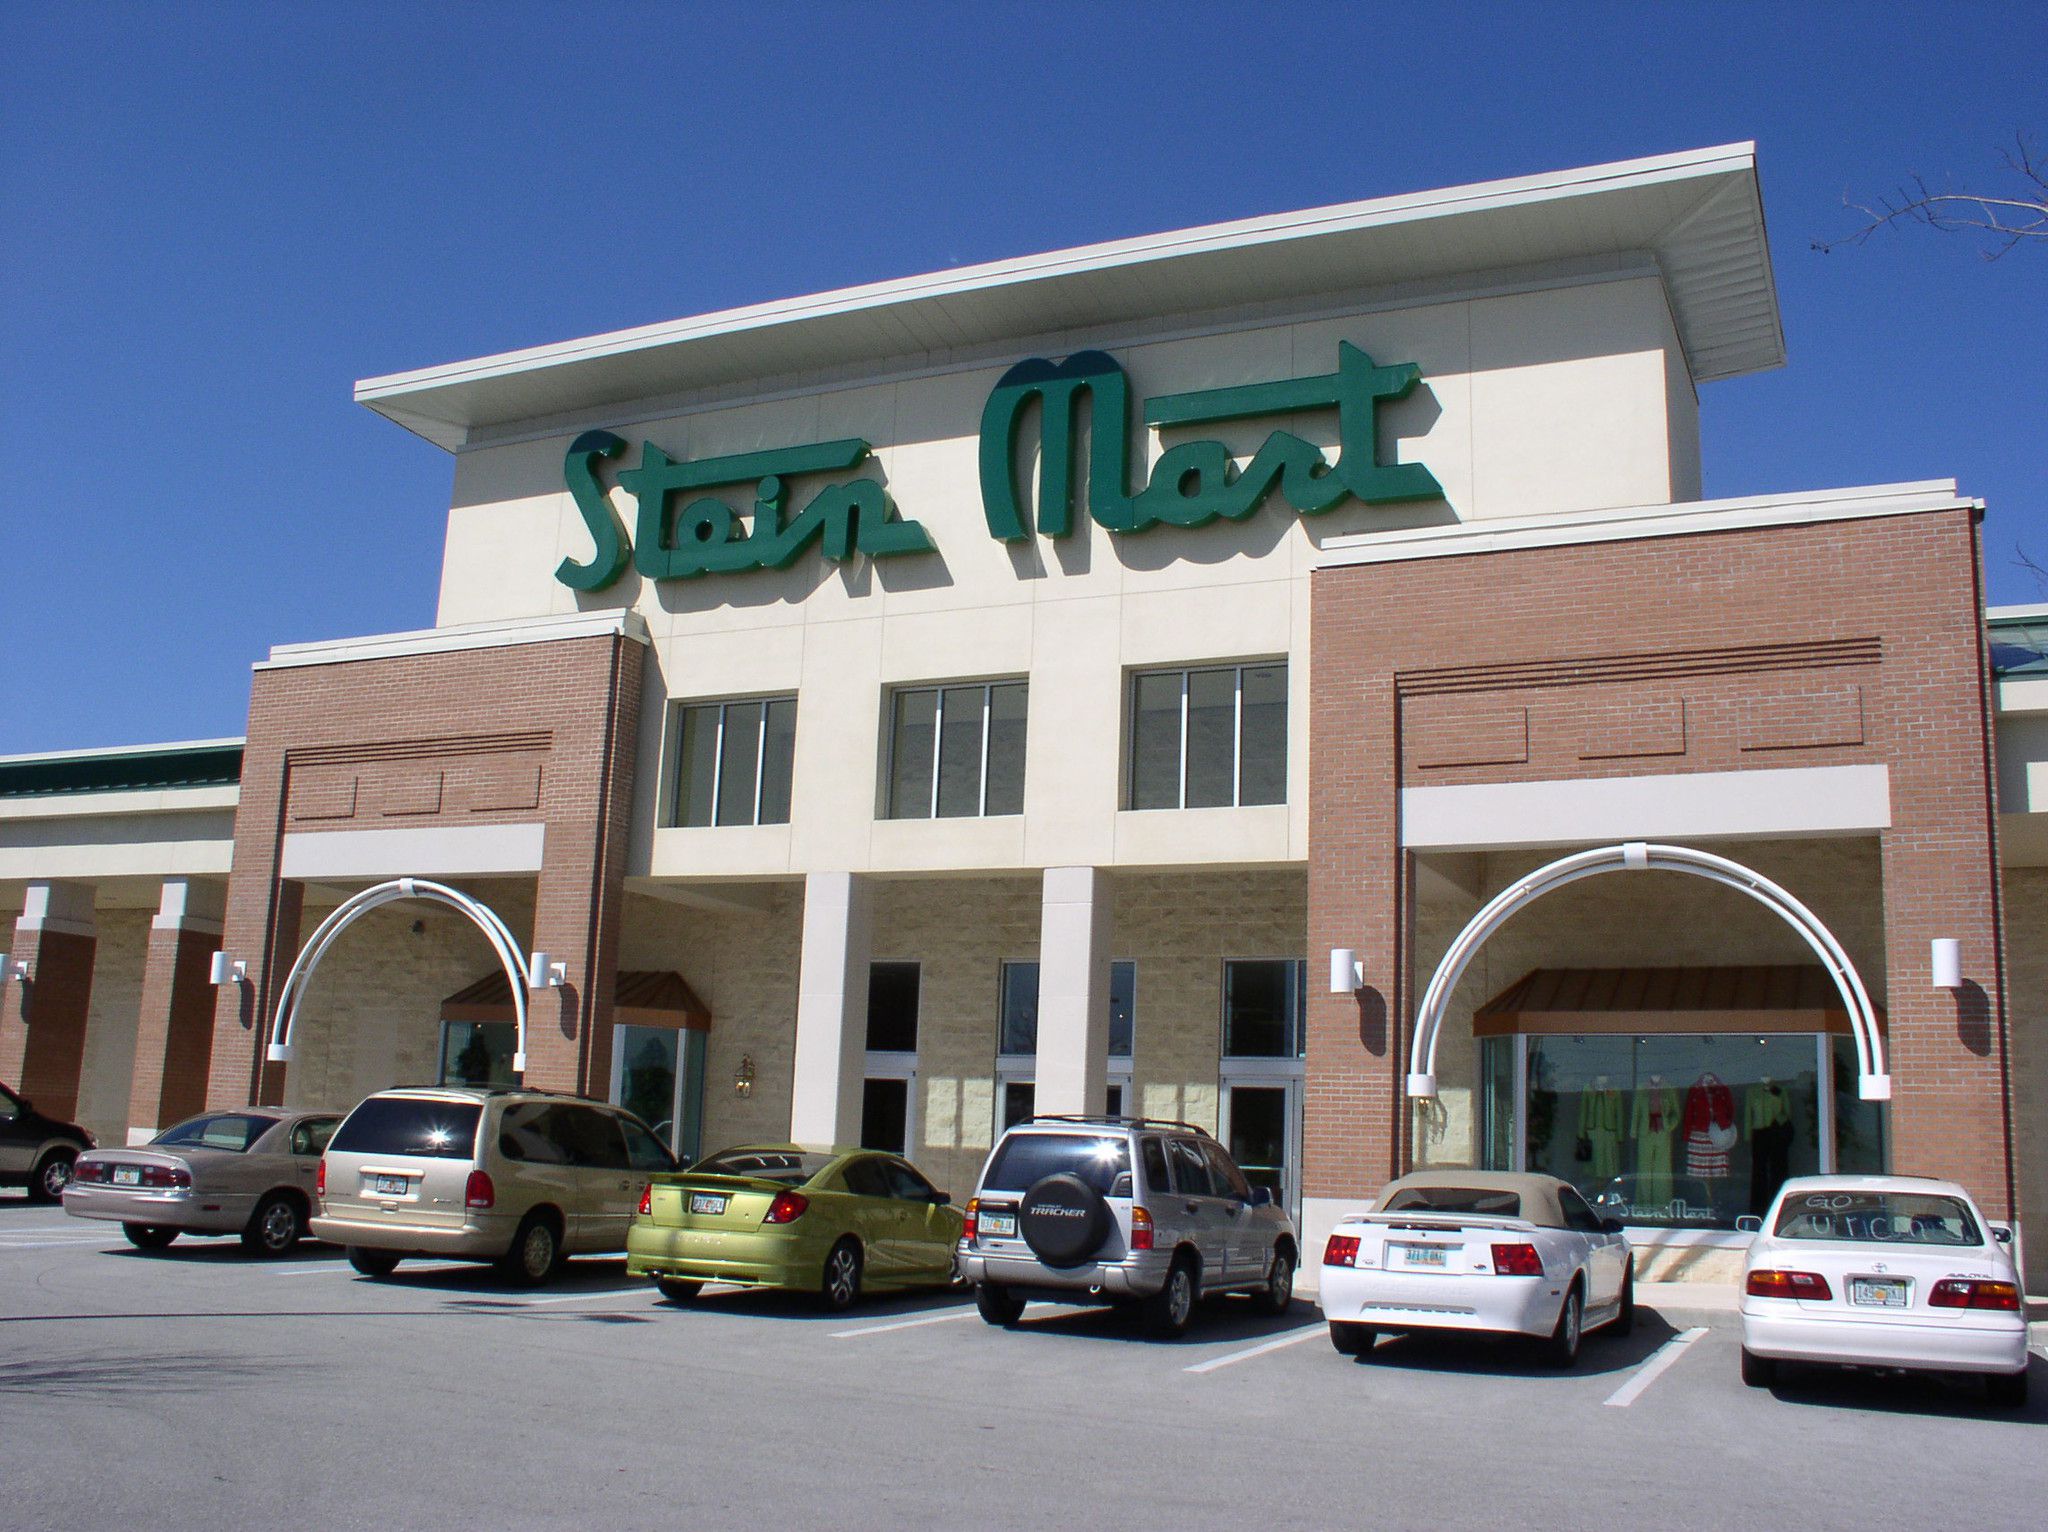 Stein Mart to close all 279 stores, including only LI location - Newsday